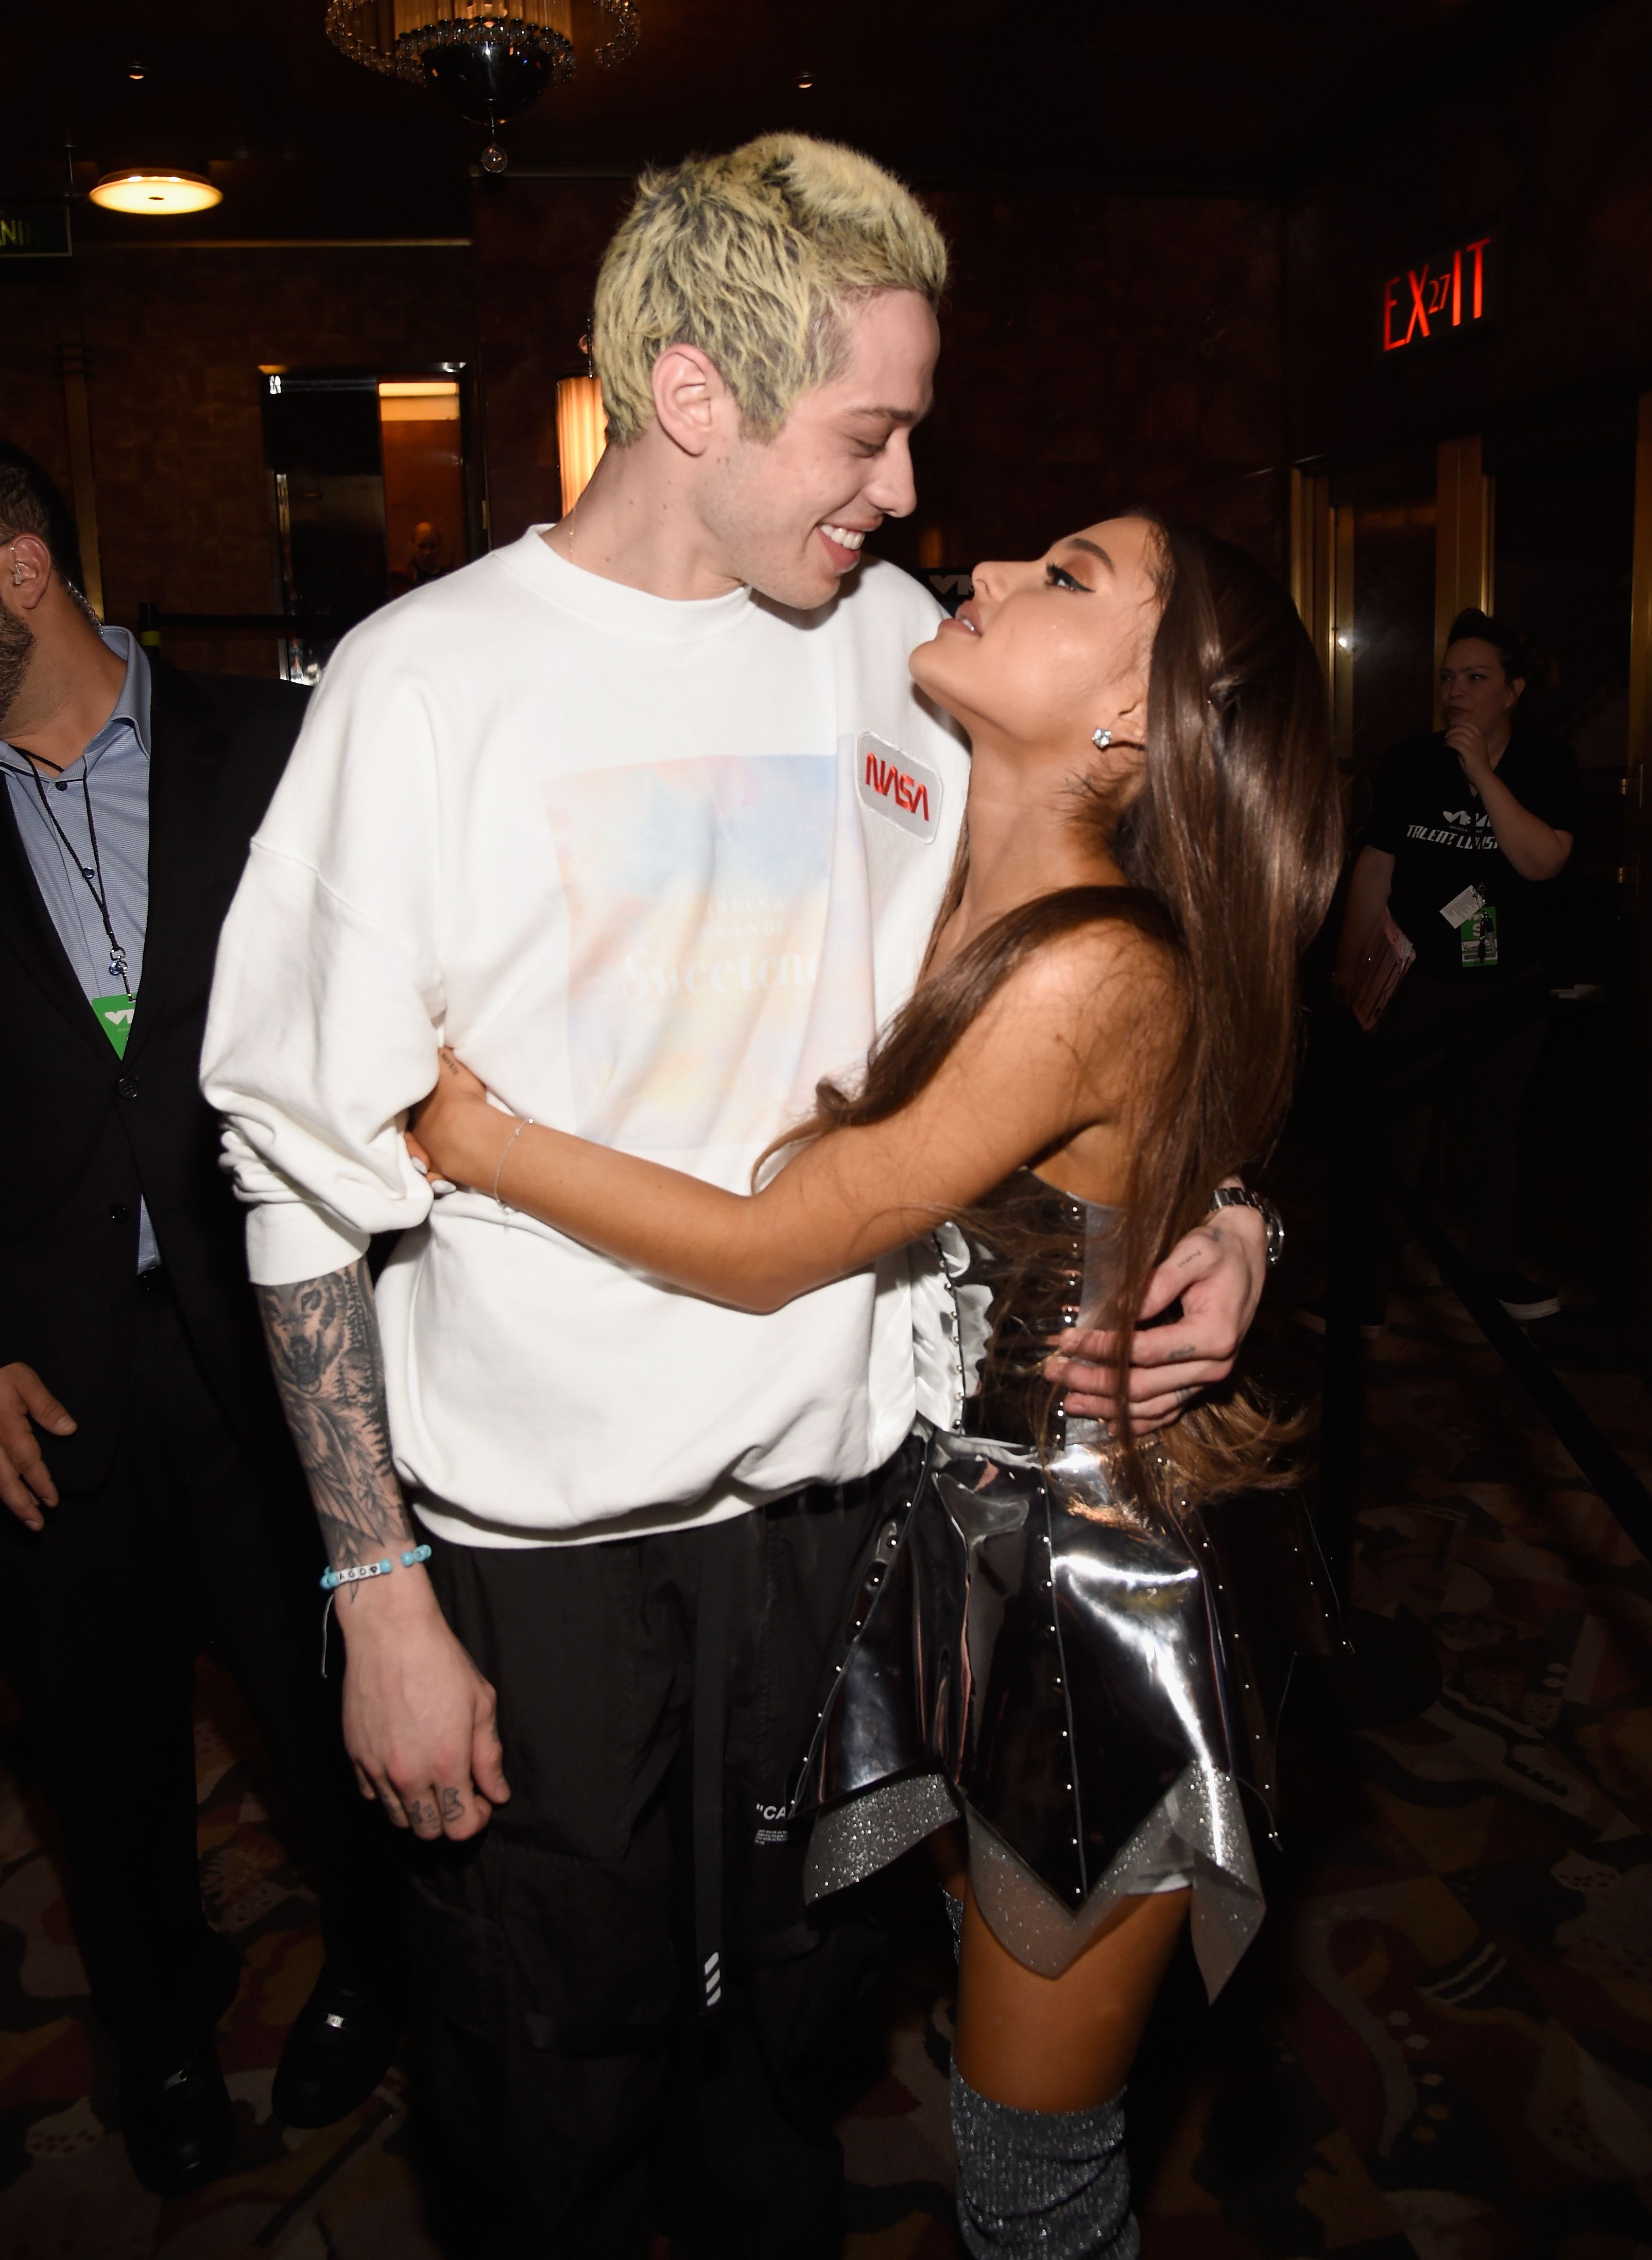 Ariana Grande Porn Captions Sex - Ariana Grande and Pete Davidson's Romance Reportedly Doomed by Management